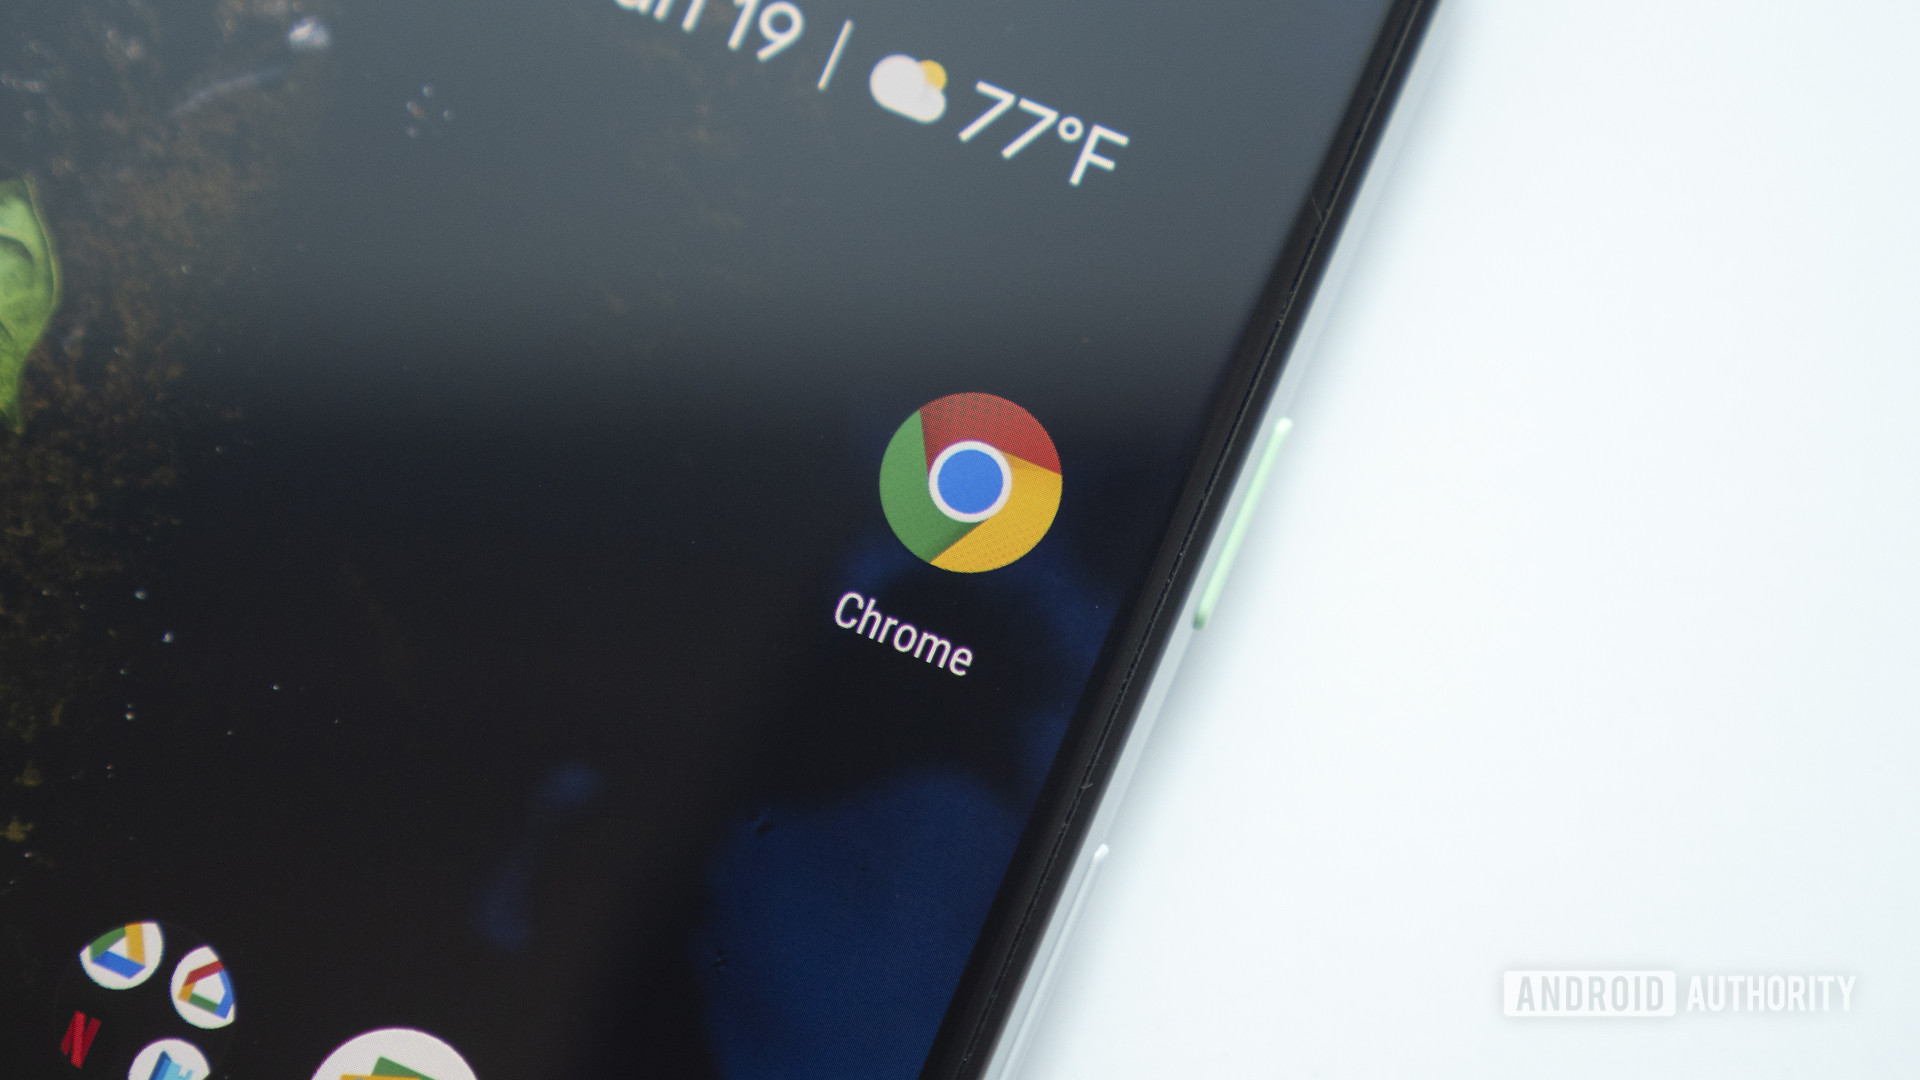 Google chrome app icon on the google pixel 3 - how to block websites on android